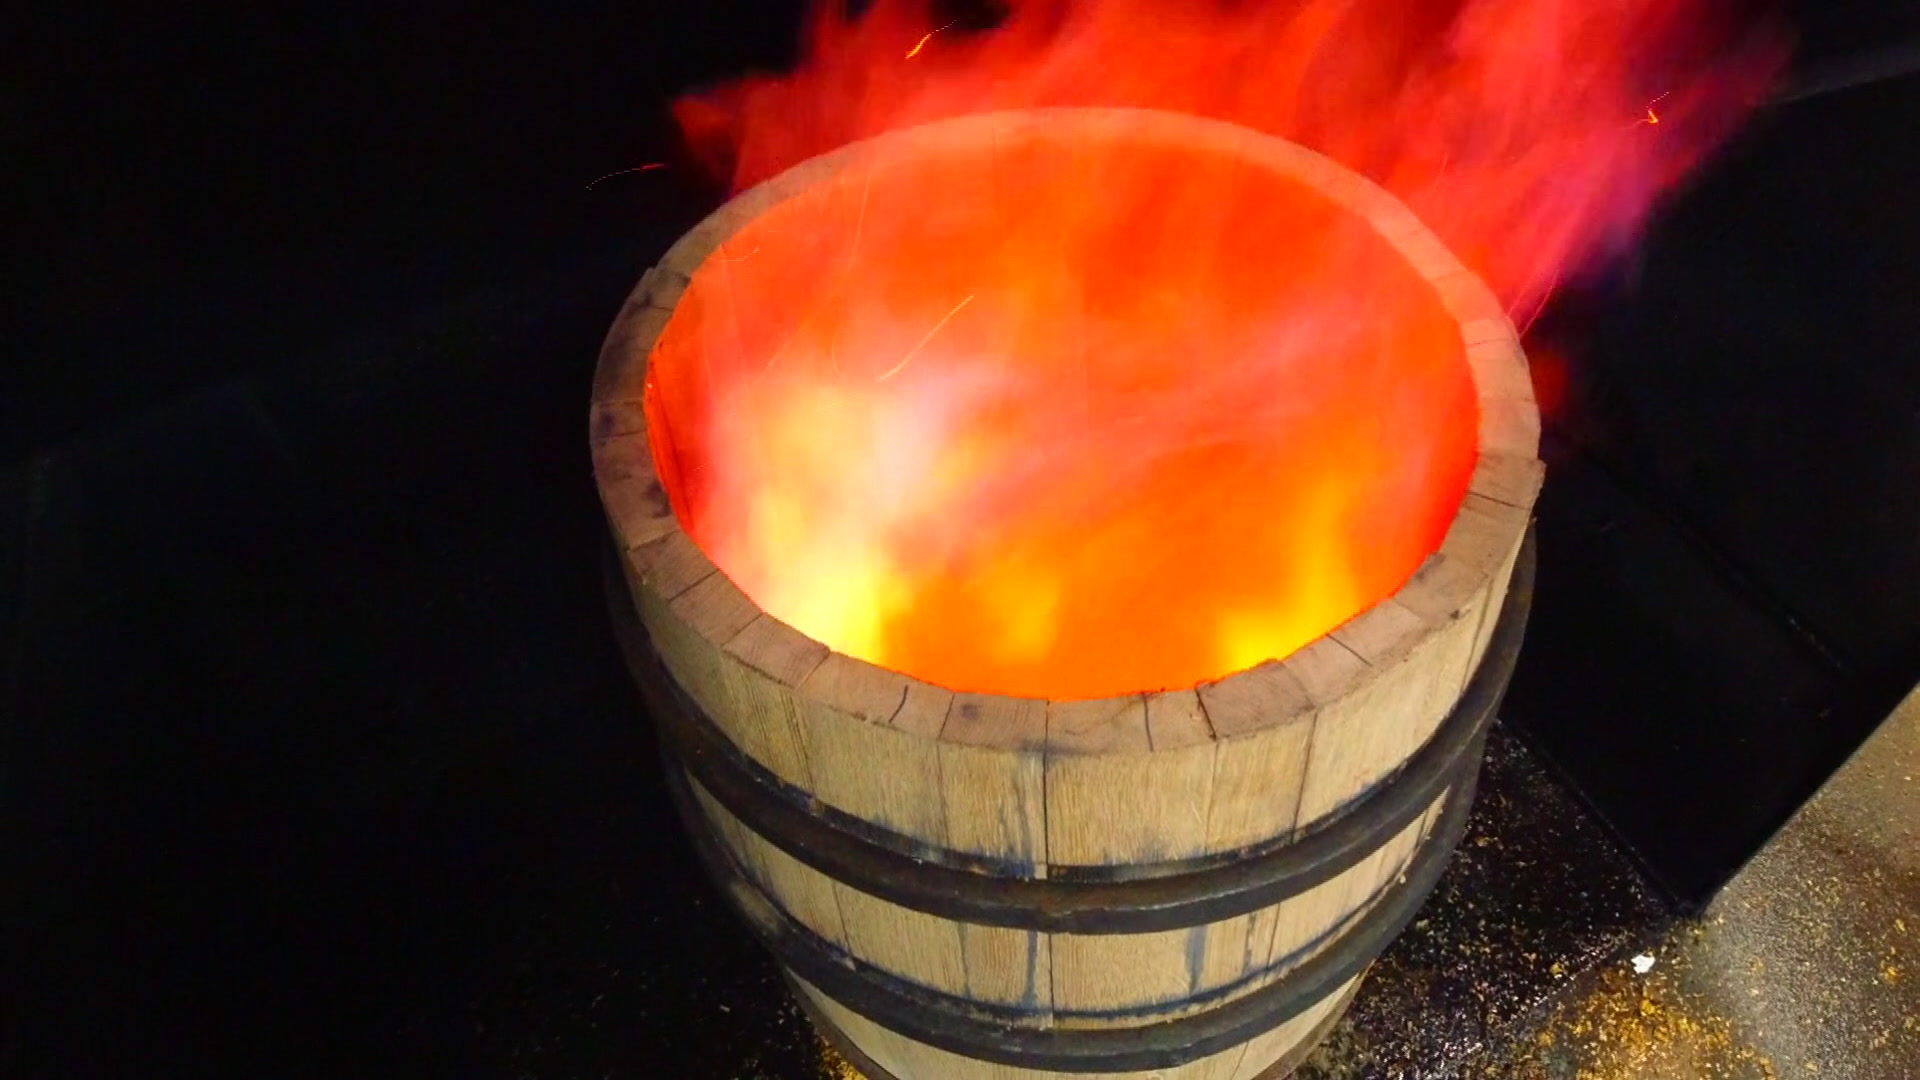 Minnesota Barrel-Makers Using Ancient Craft To Bring New Flavors To Whiskey